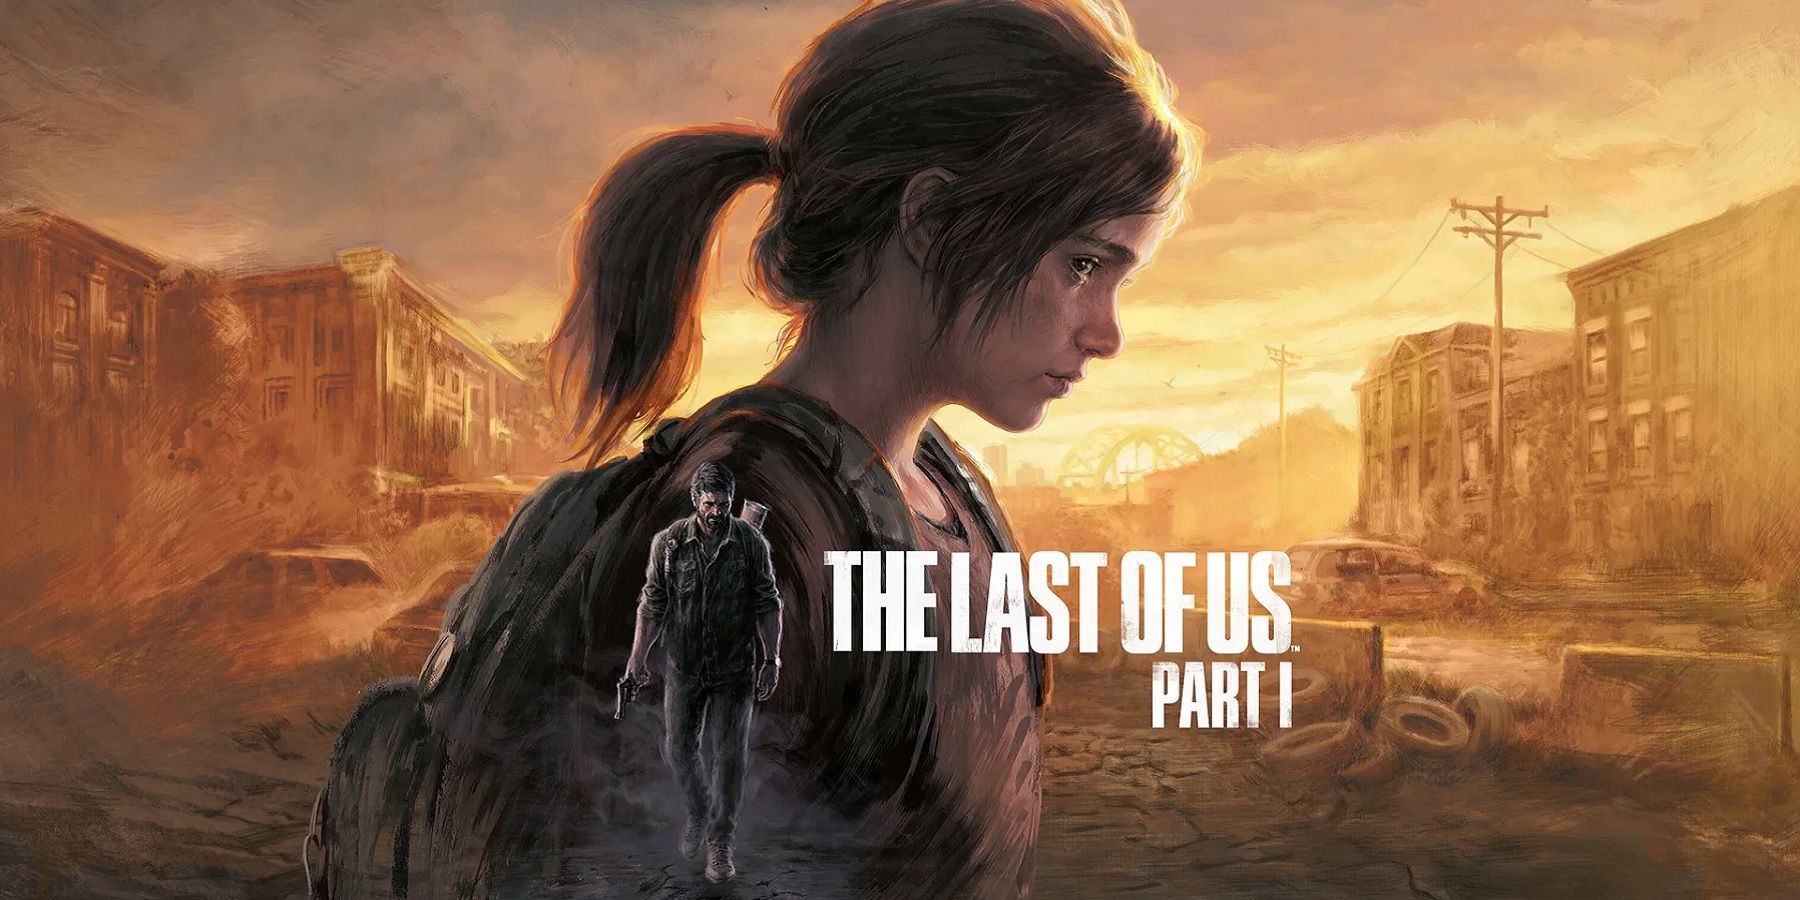 The Last of Us Part 1 PC Release Date Could Be Sooner Than Expected